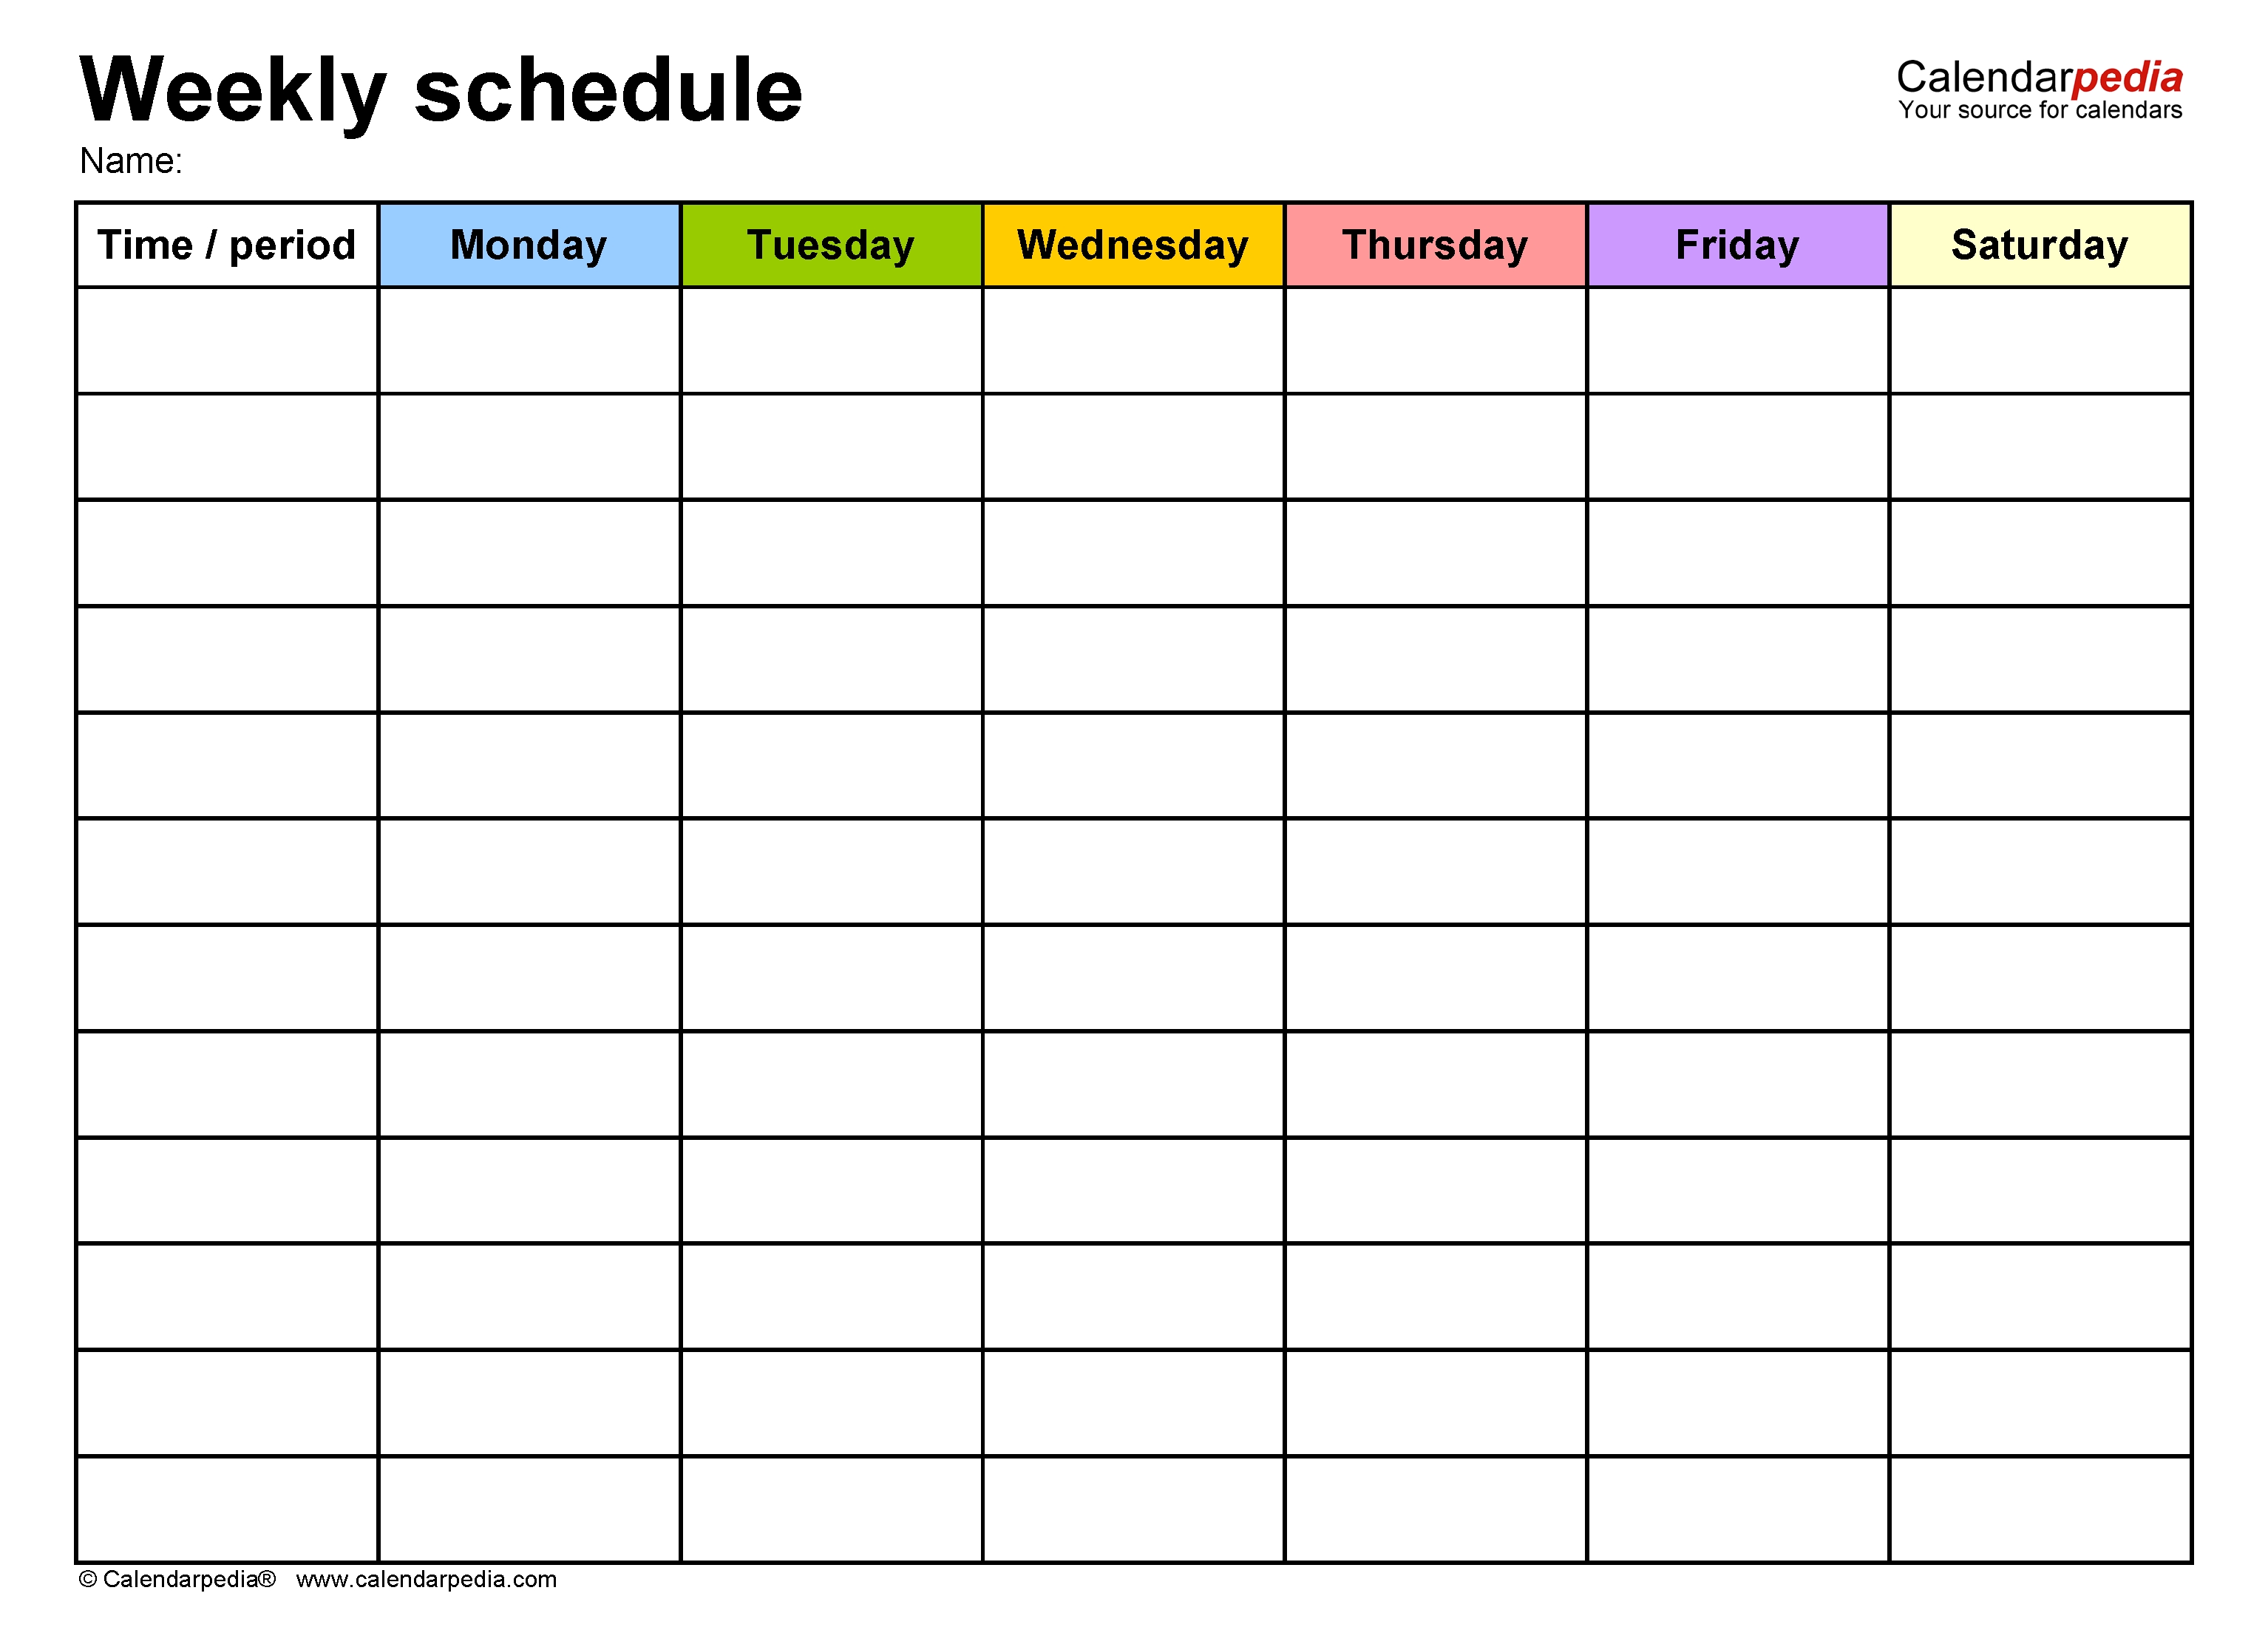 Free Weekly Schedule Templates For Word - 18 Templates  Monday To Sunday Calendar Template